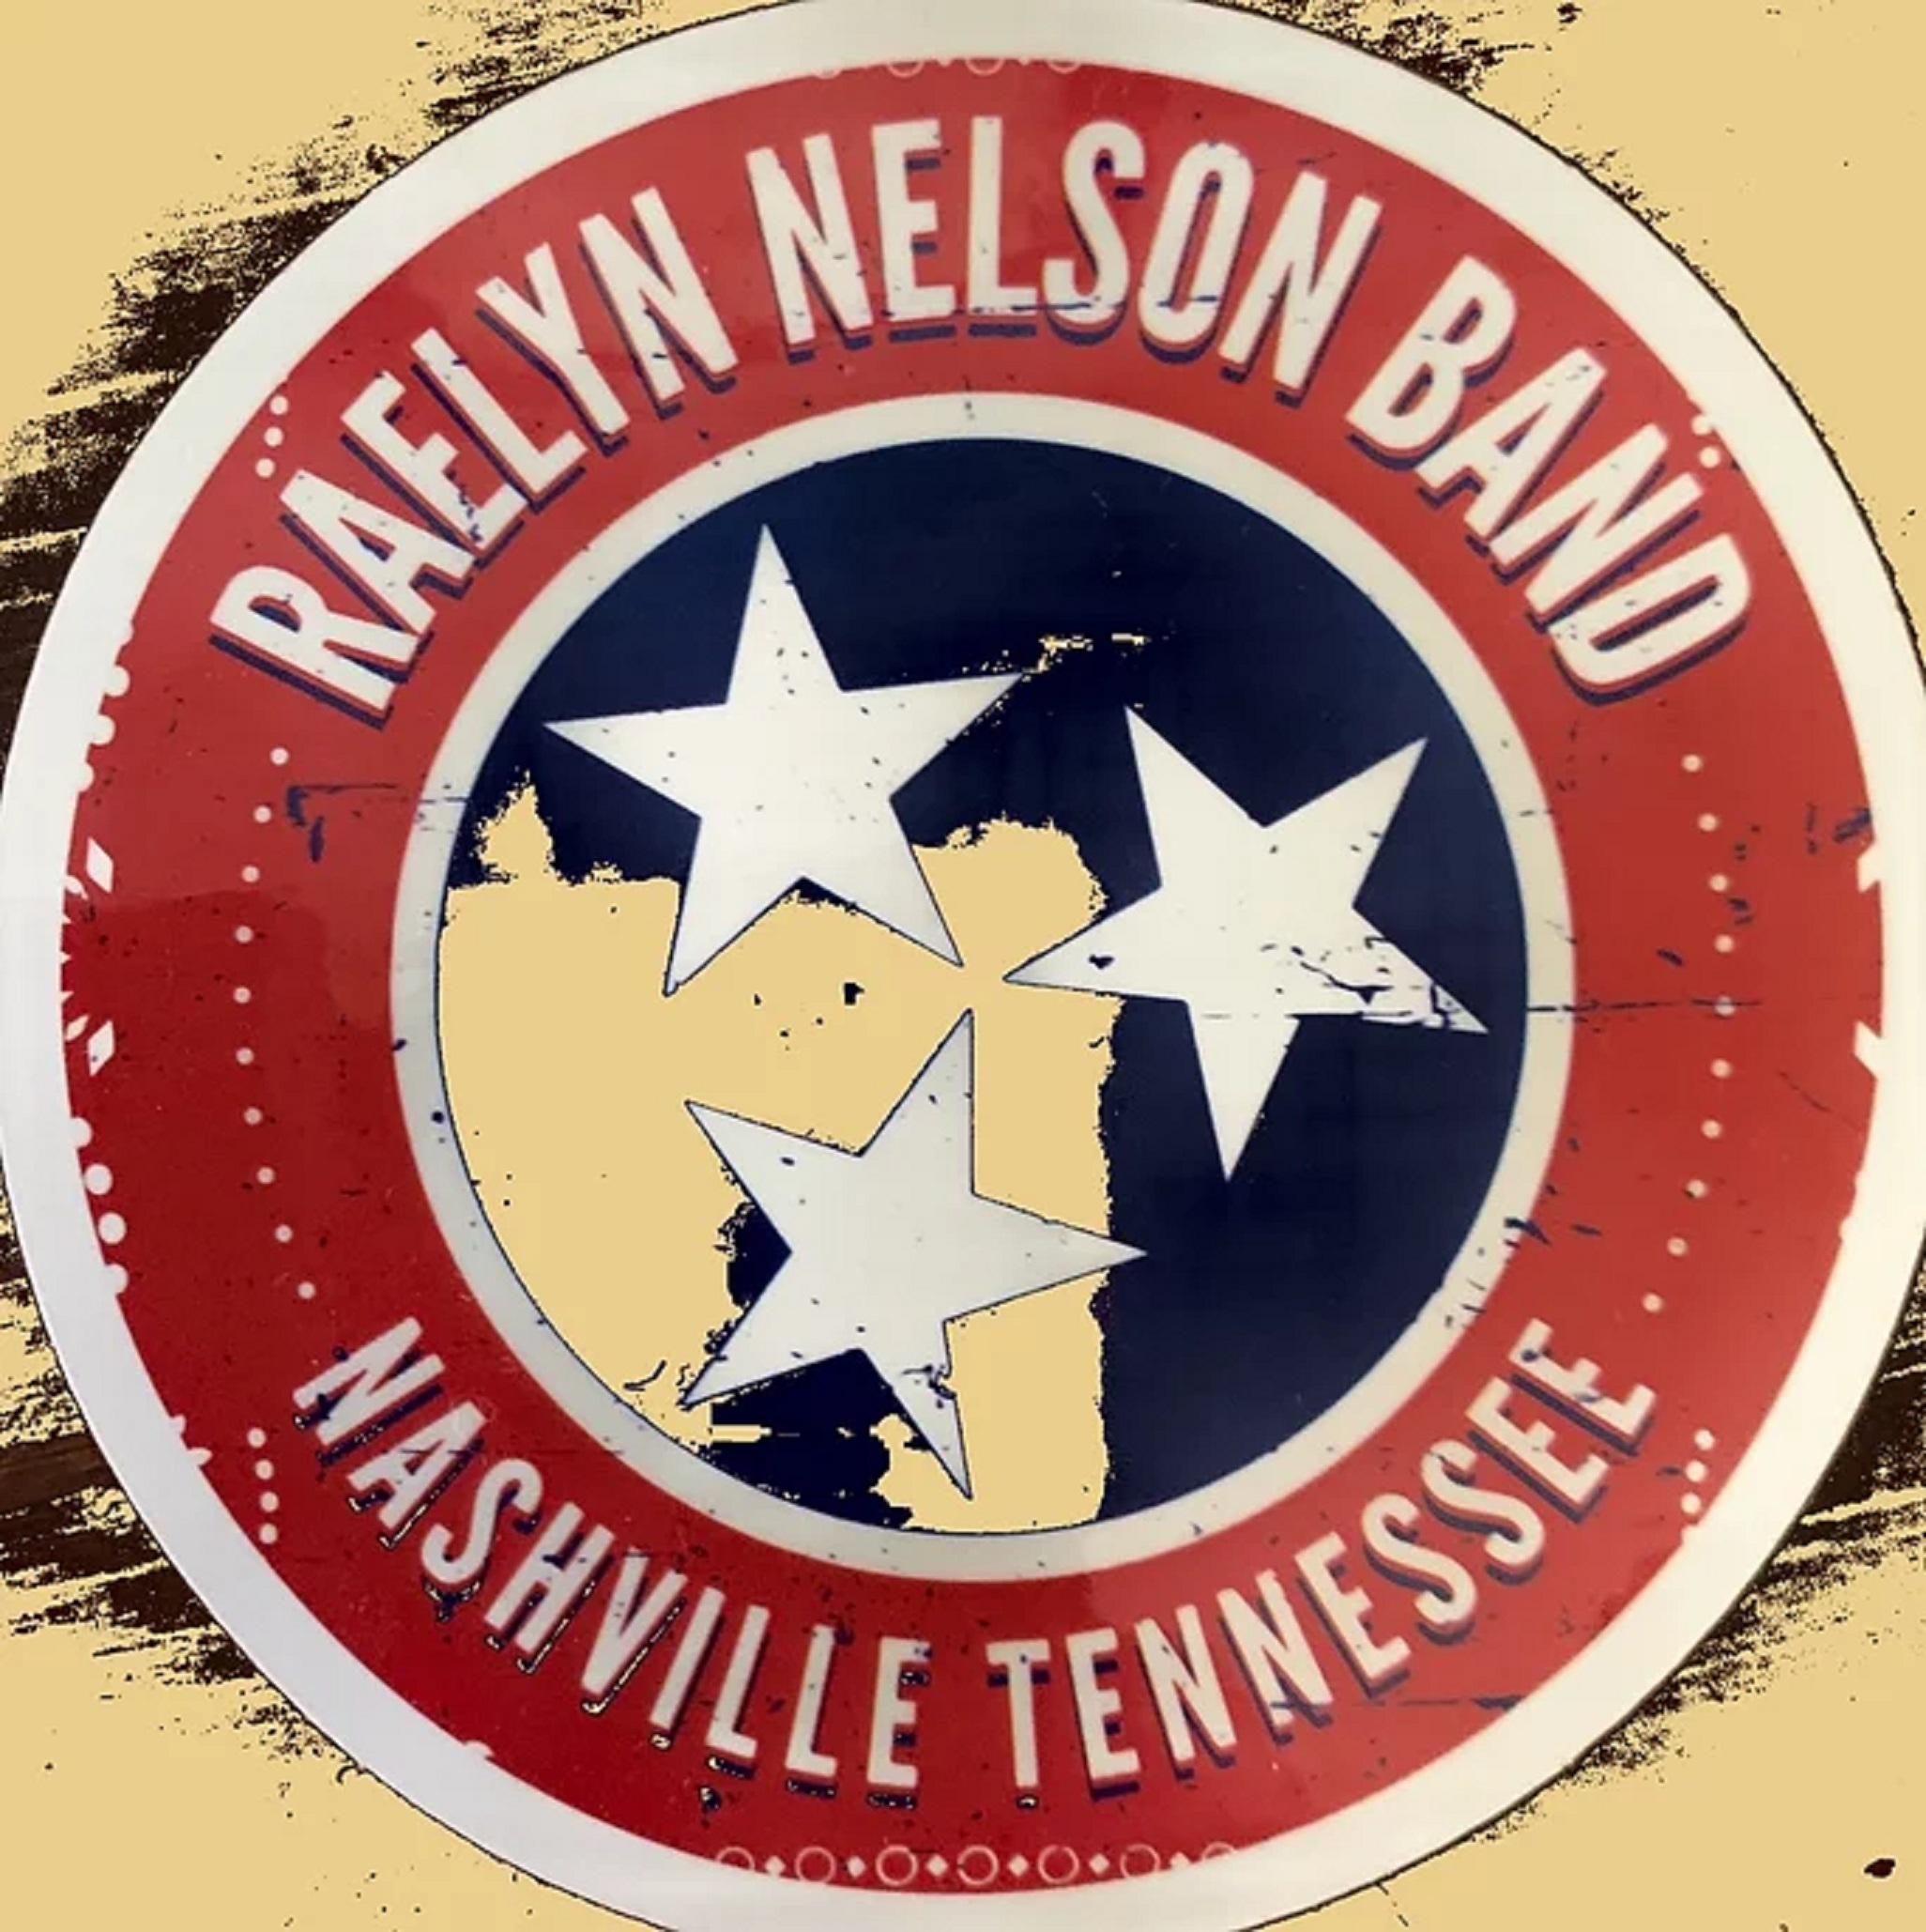 Raelyn Nelson Band, led by granddaughter of the legendary Willie Nelson, announces new video "Free"